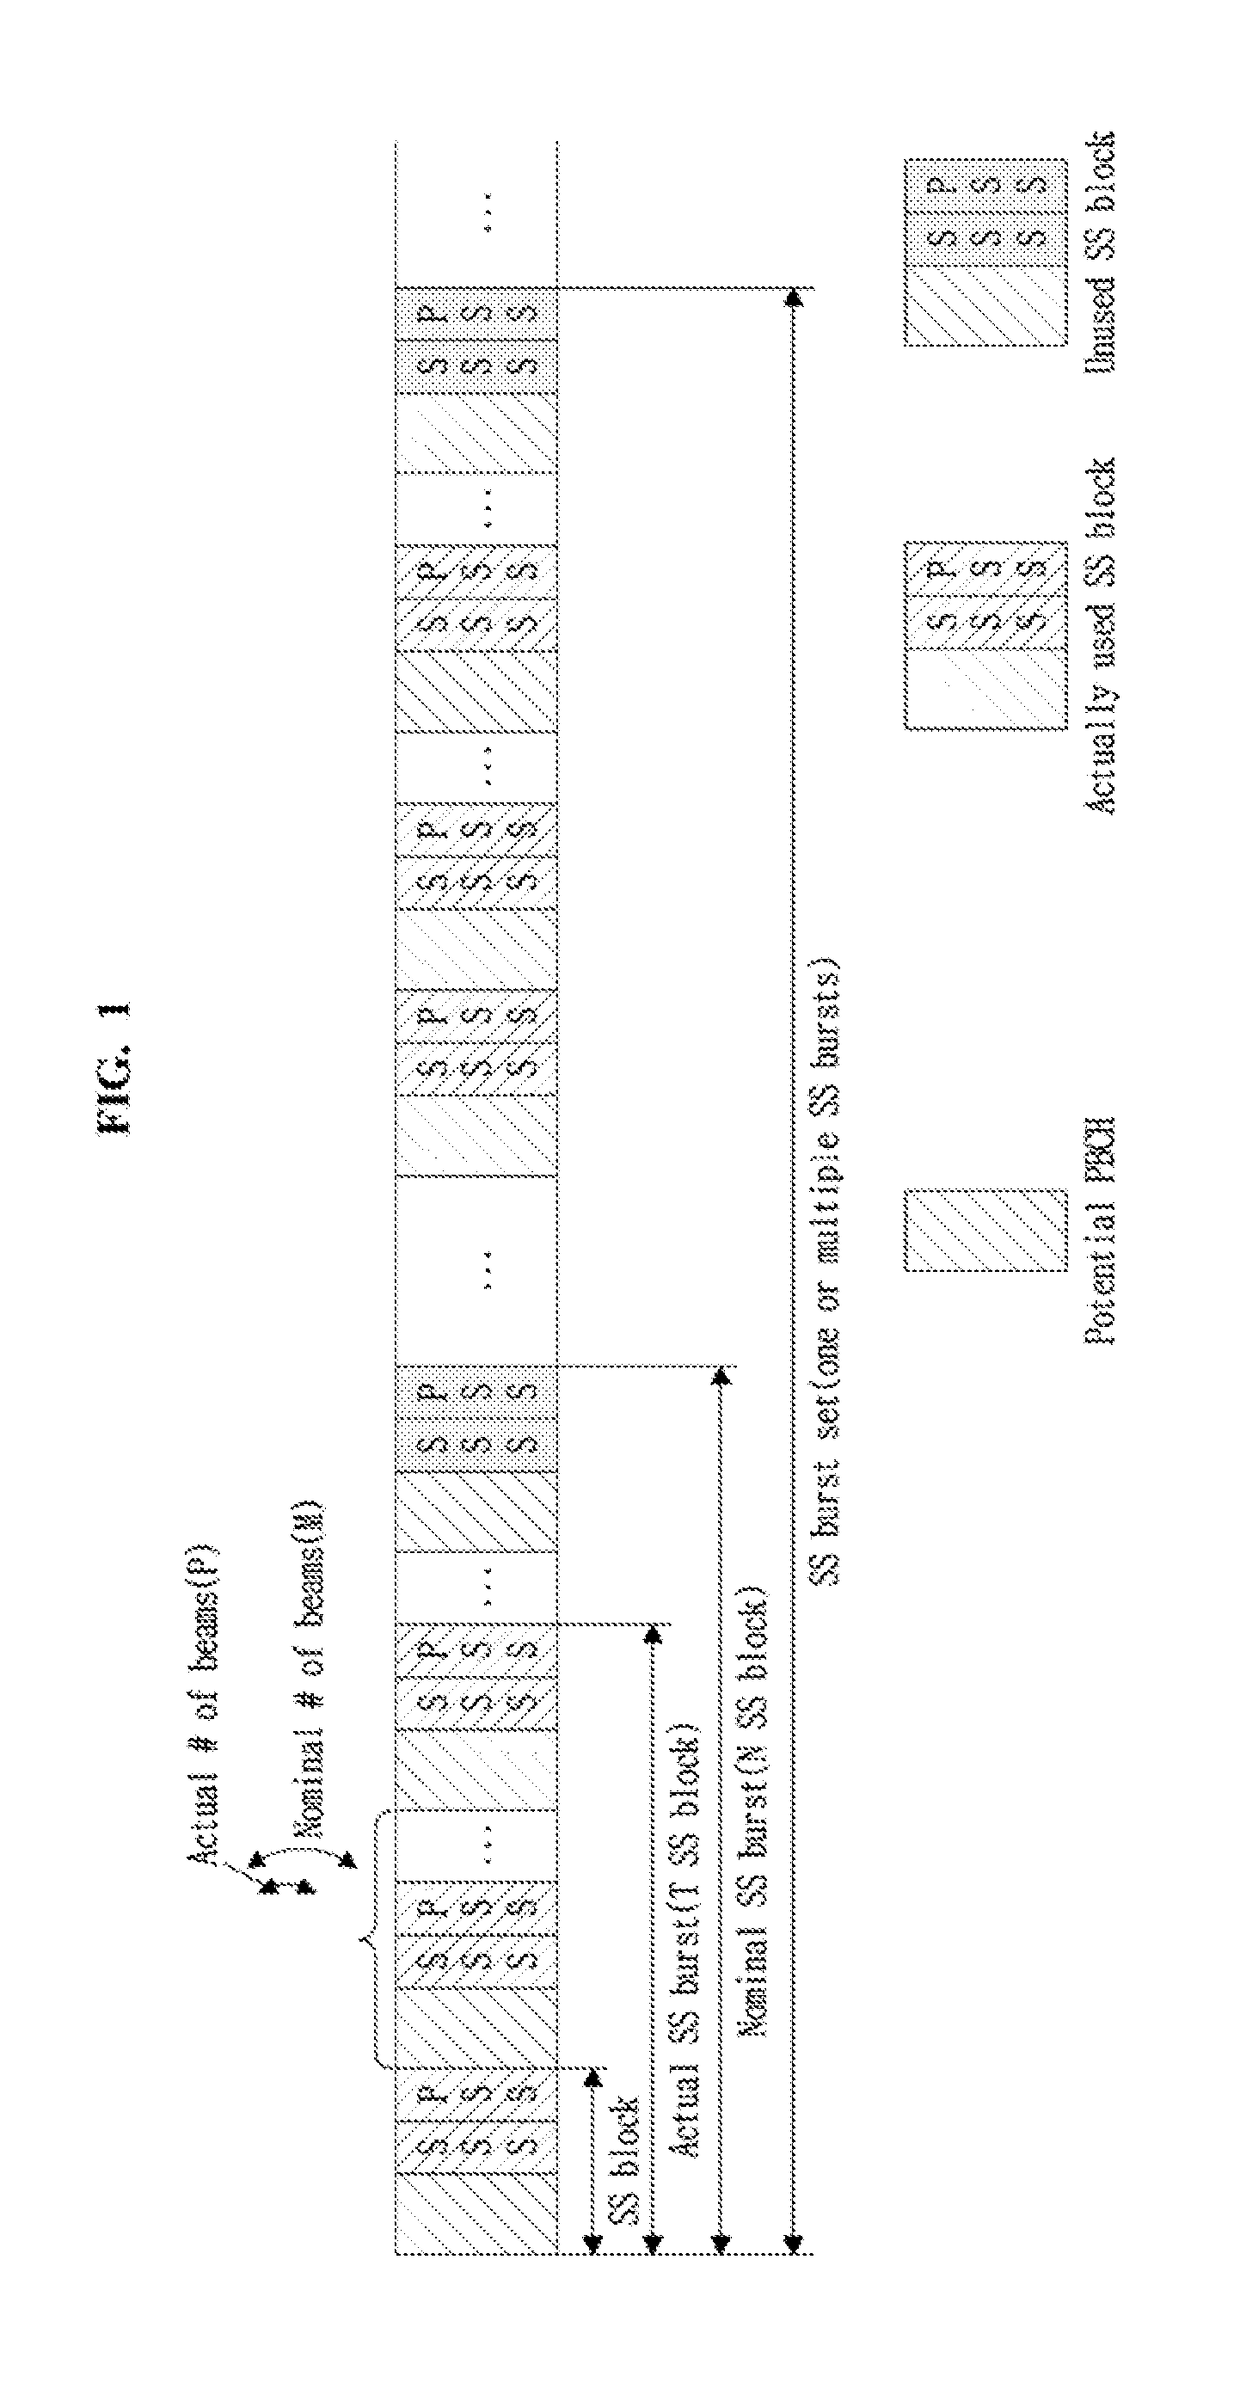 Method and apparatus for broadcast channel configuration and broadcast channel transmission and reception for communication system